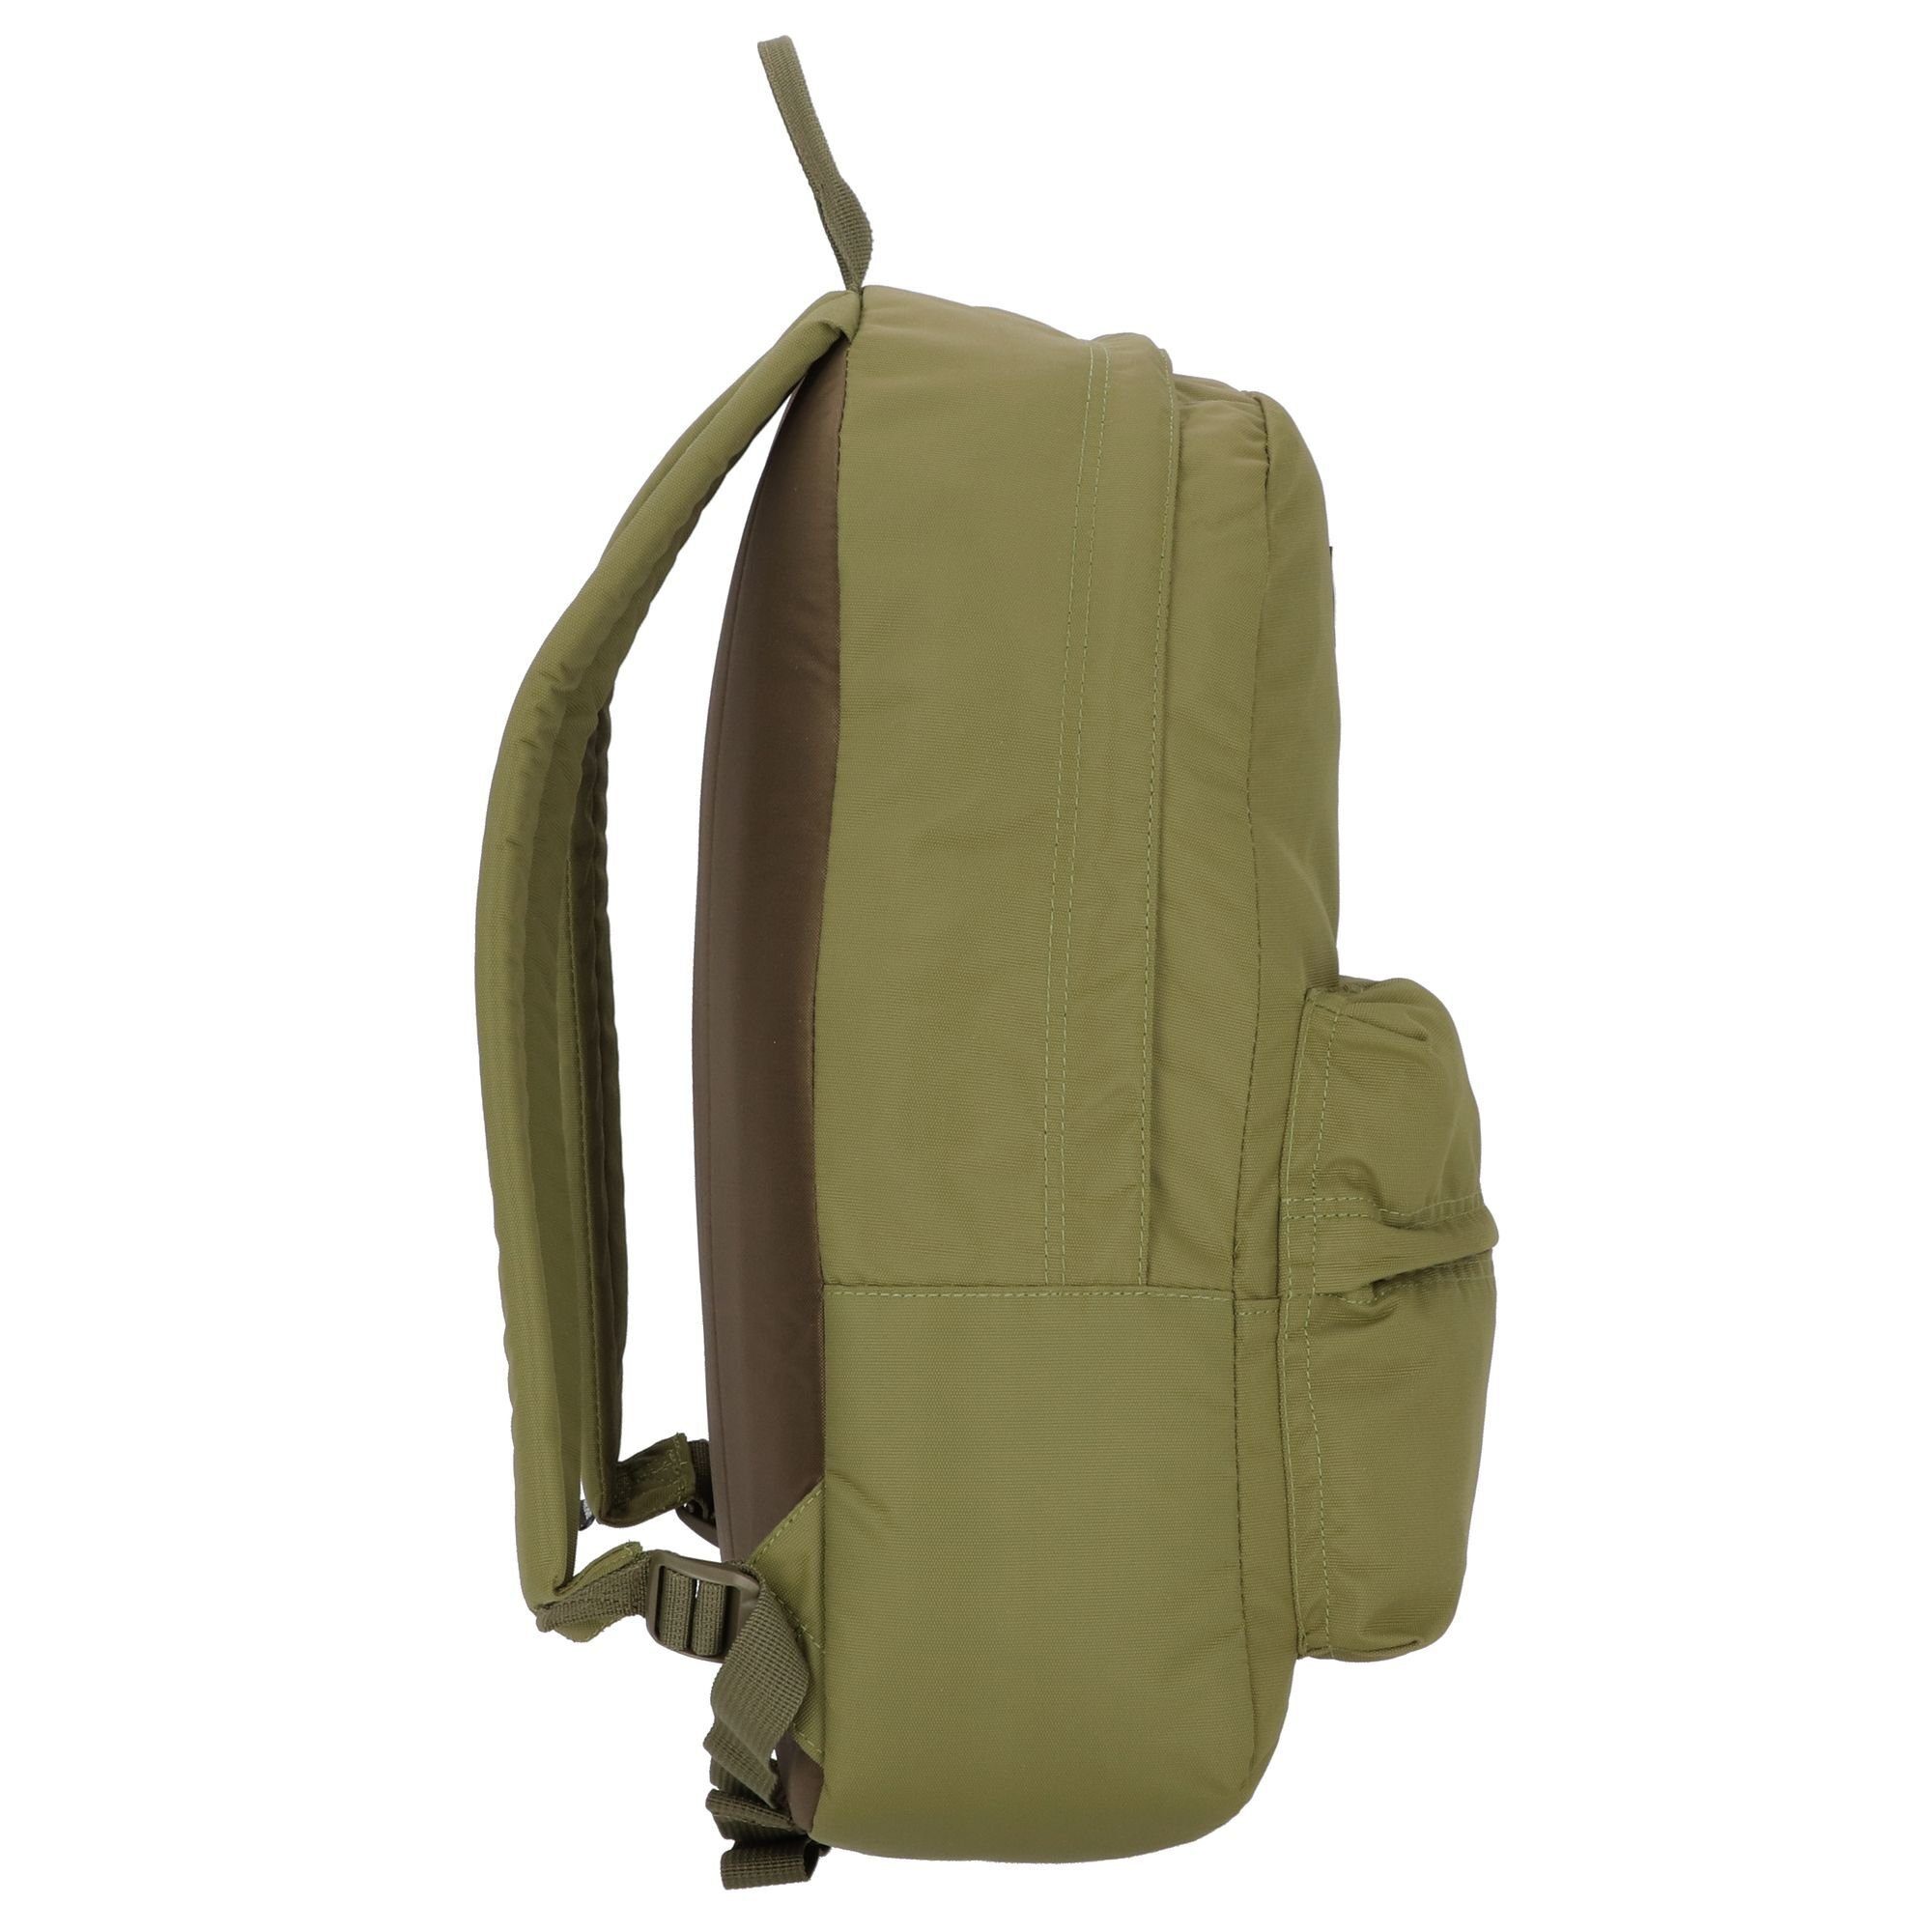 Dakine Daypack green Polyester 365 utility PACK